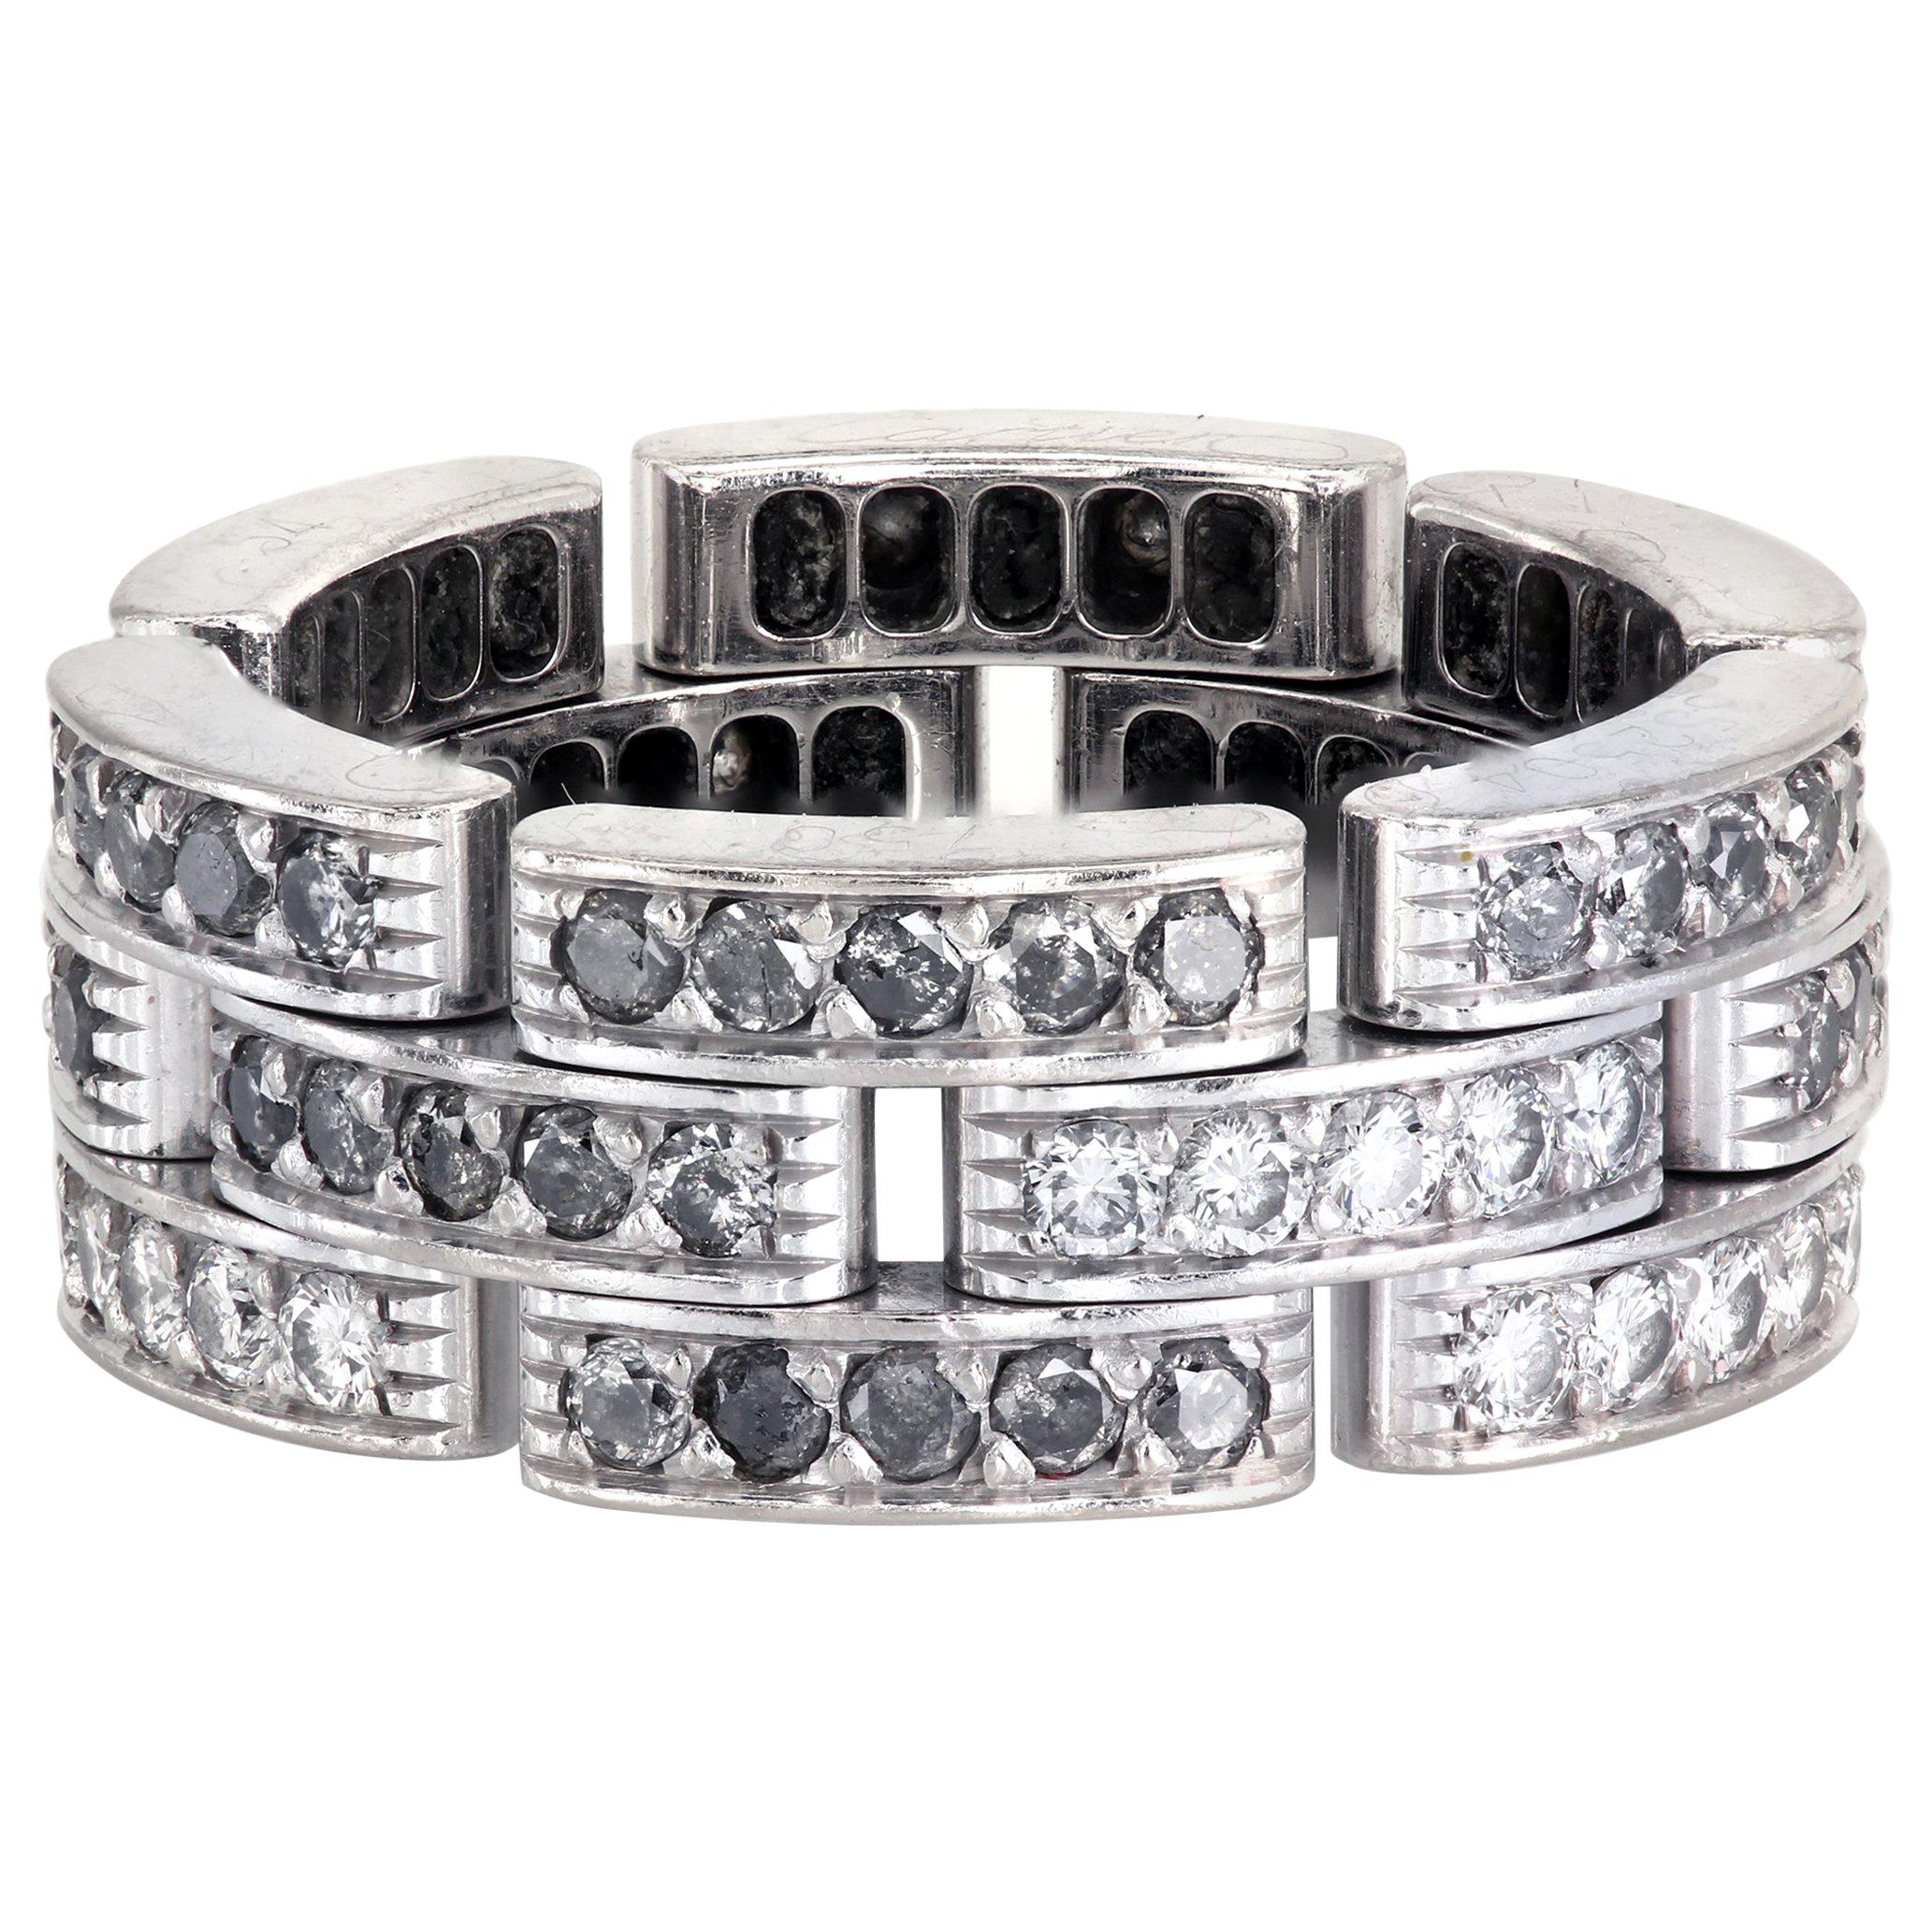 Cartier Panthère Pavé Diamond Band with White and Grey Diamonds Estate Pre-Owned